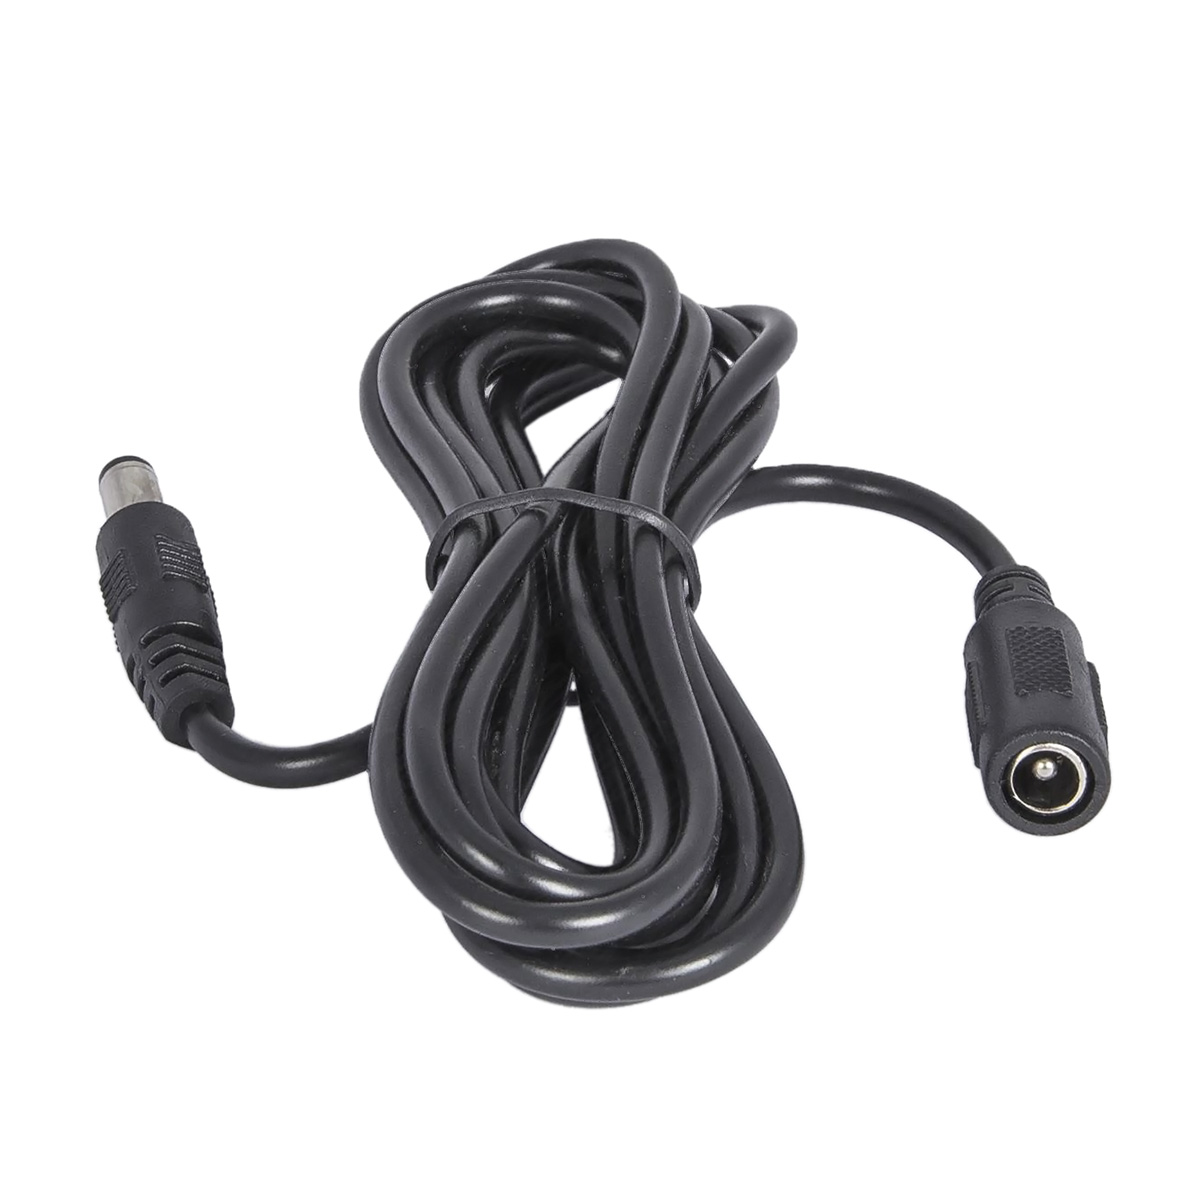 Baader 2-metre Extension Cable for Baader Outdoor Power Supply